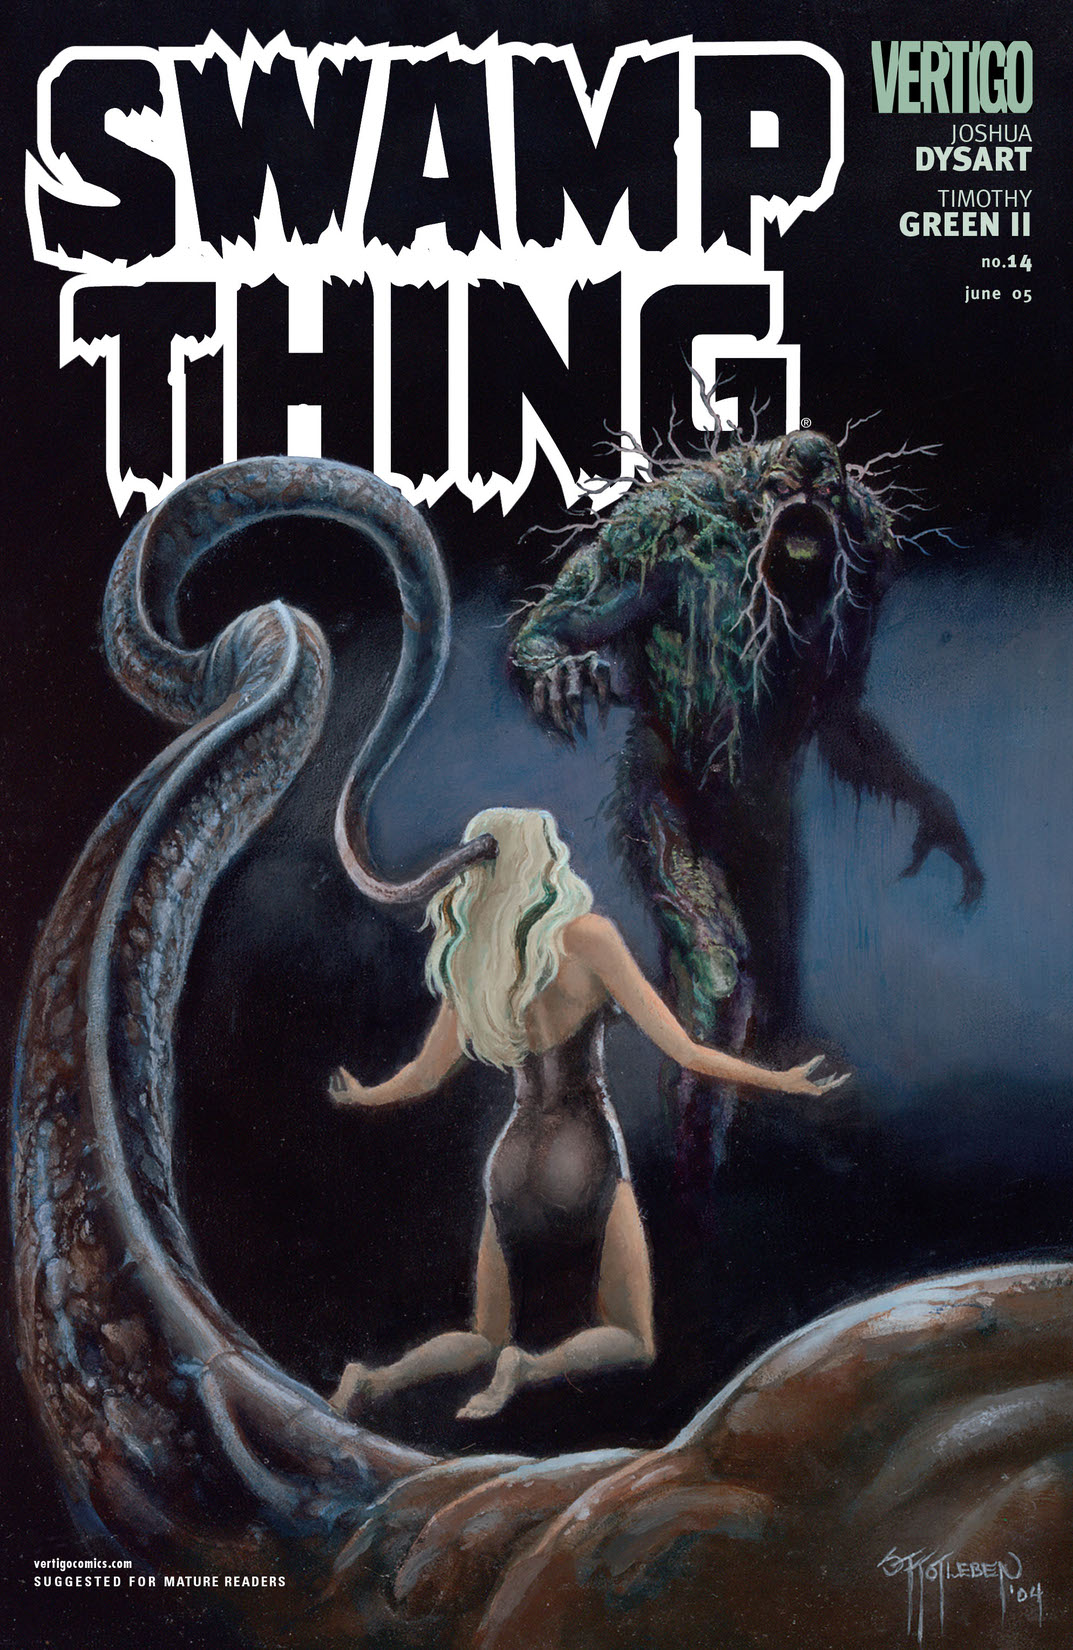 Swamp Thing (2004-) #14 preview images